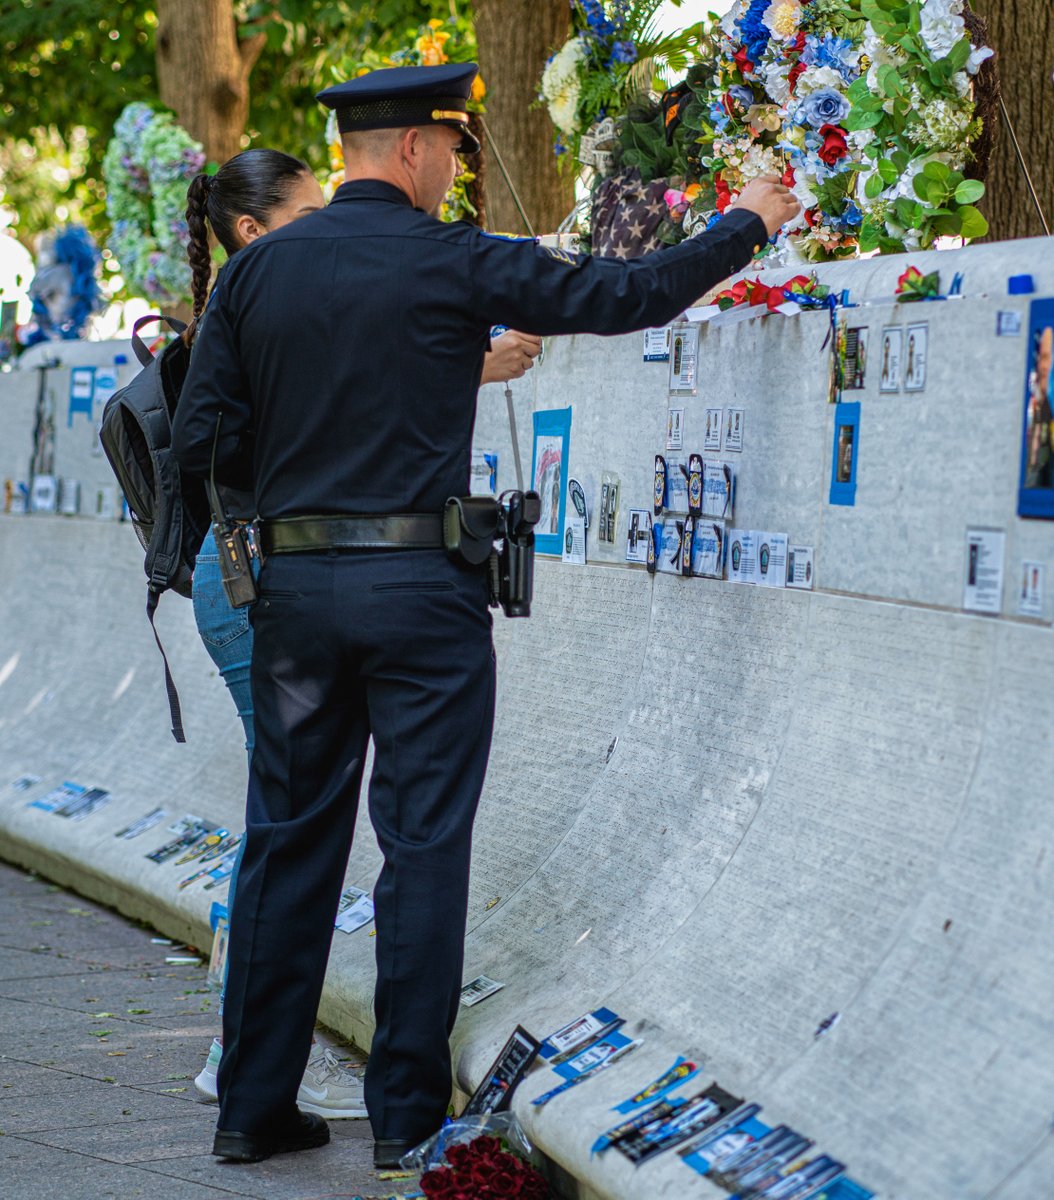 Thousands of people visited the National Law Enforcement Officers Memorial during National Police Week this year to honor a fallen family member, friend, or co-worker. 📸 : Jose Aviles | @ArmyVet67 #NationalPoliceWeek #HonortheFallen #LawEnforcement #OfficersMemorial